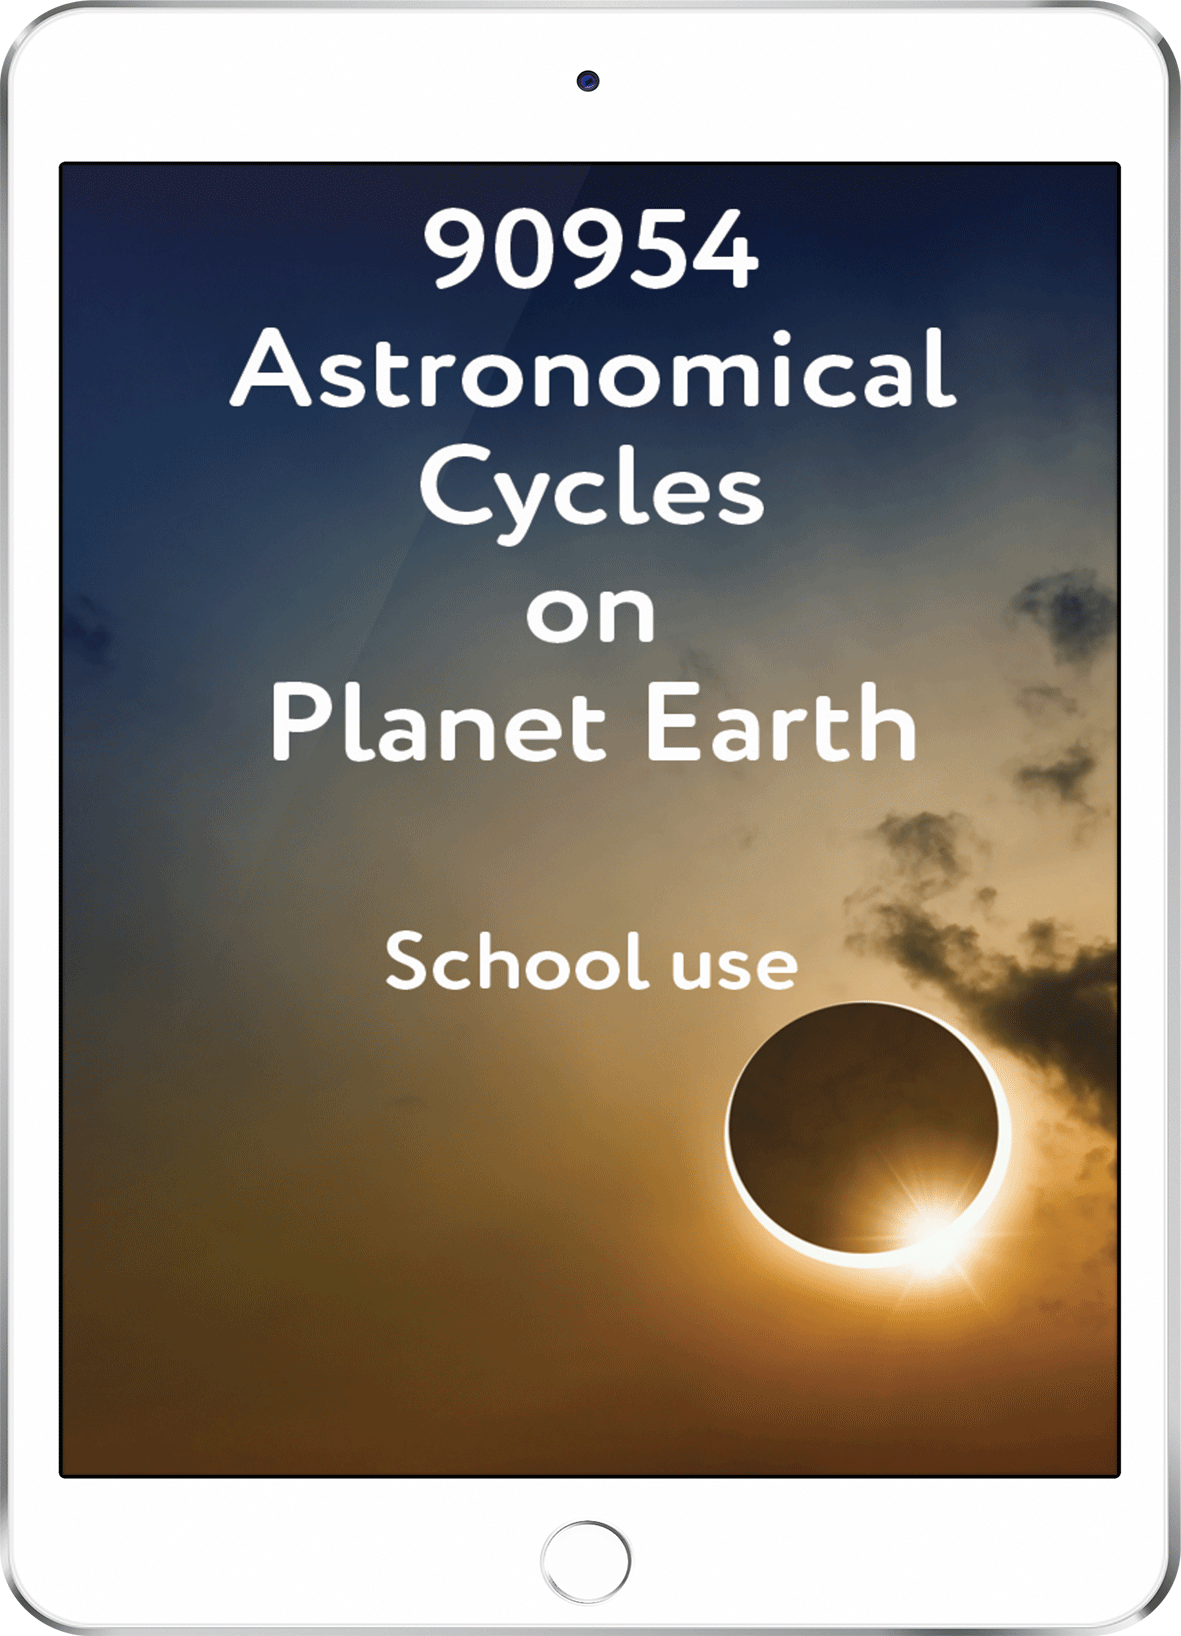 90954 Astronomical Cycles on Planet Earth - School Use